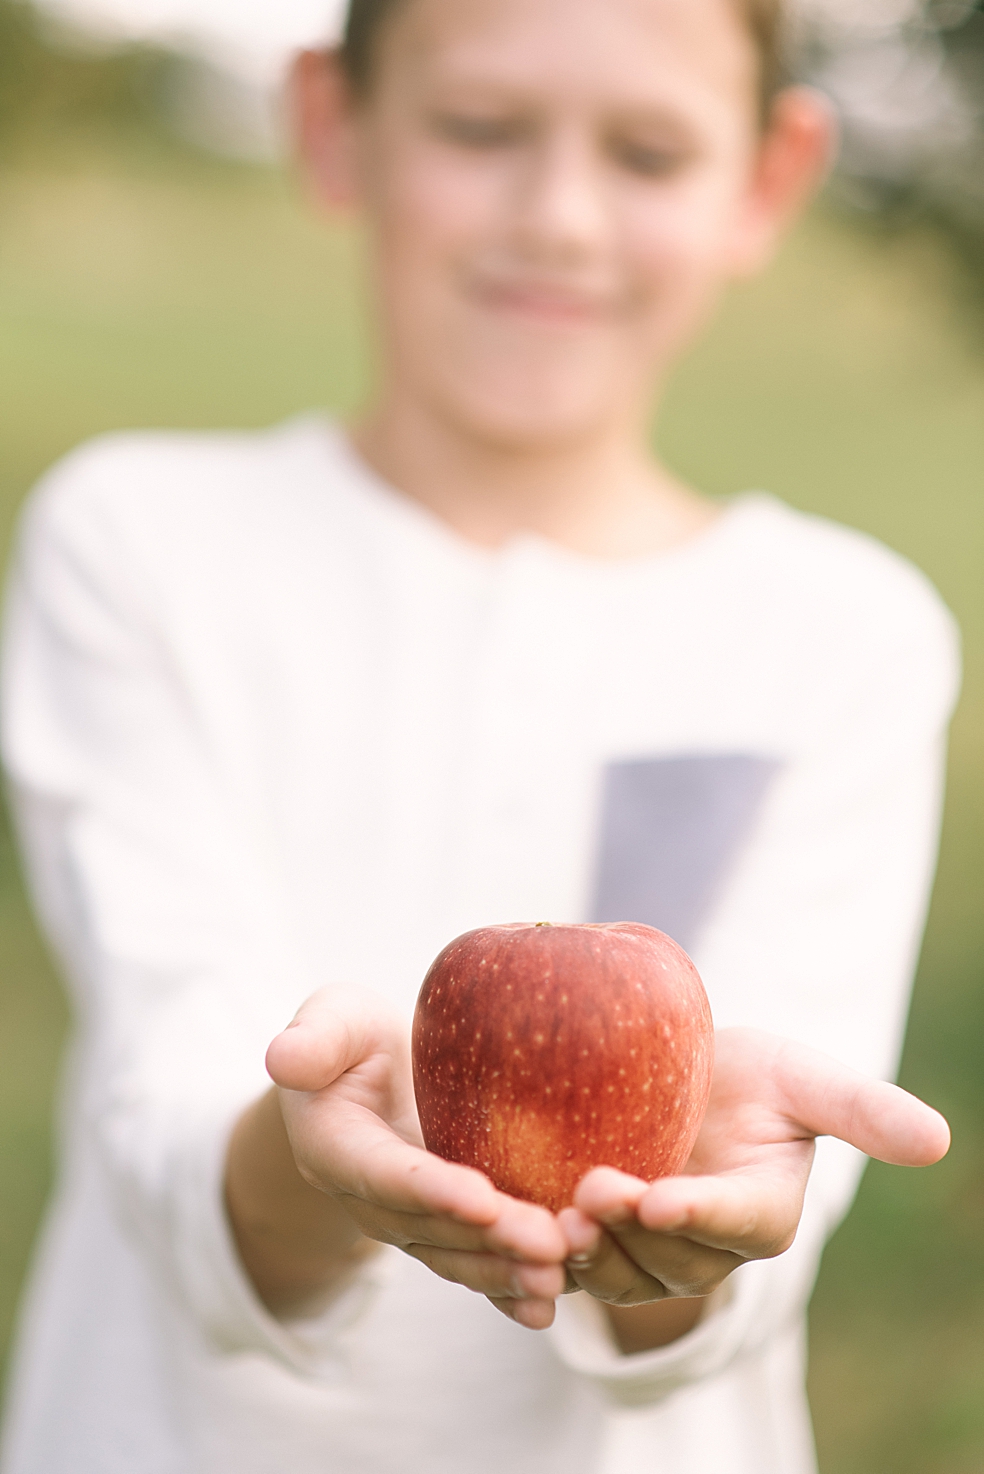 Detail photo of little boy holding an apple | Photo by Jessica Lee Photography